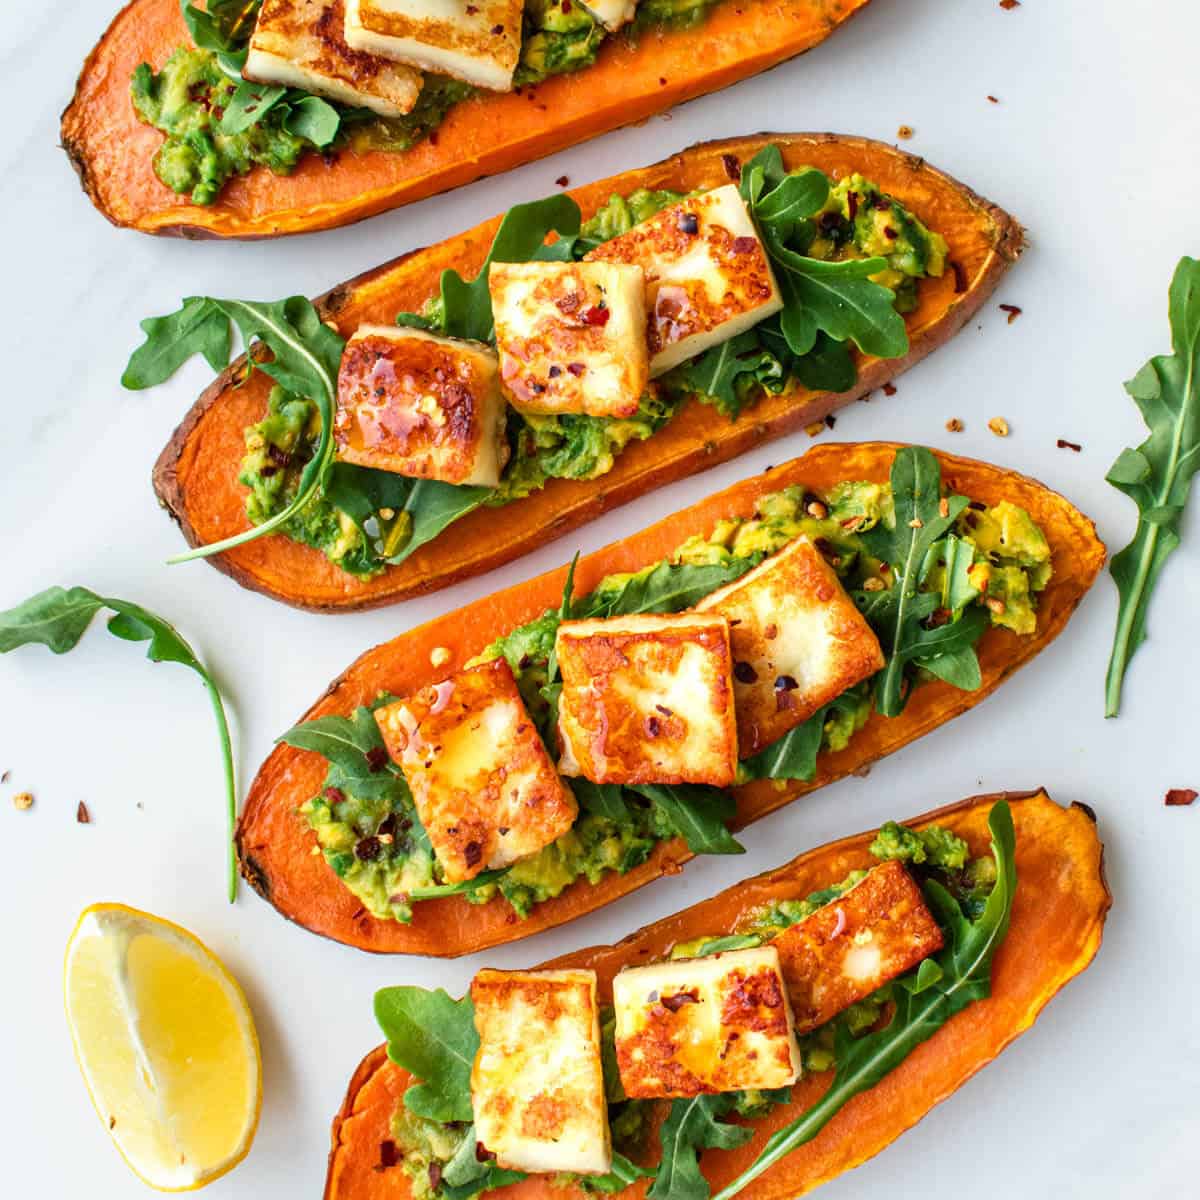 Sweet Potato Toast topped with smashed avocado, rocket salad, halloumi cheese and chilli